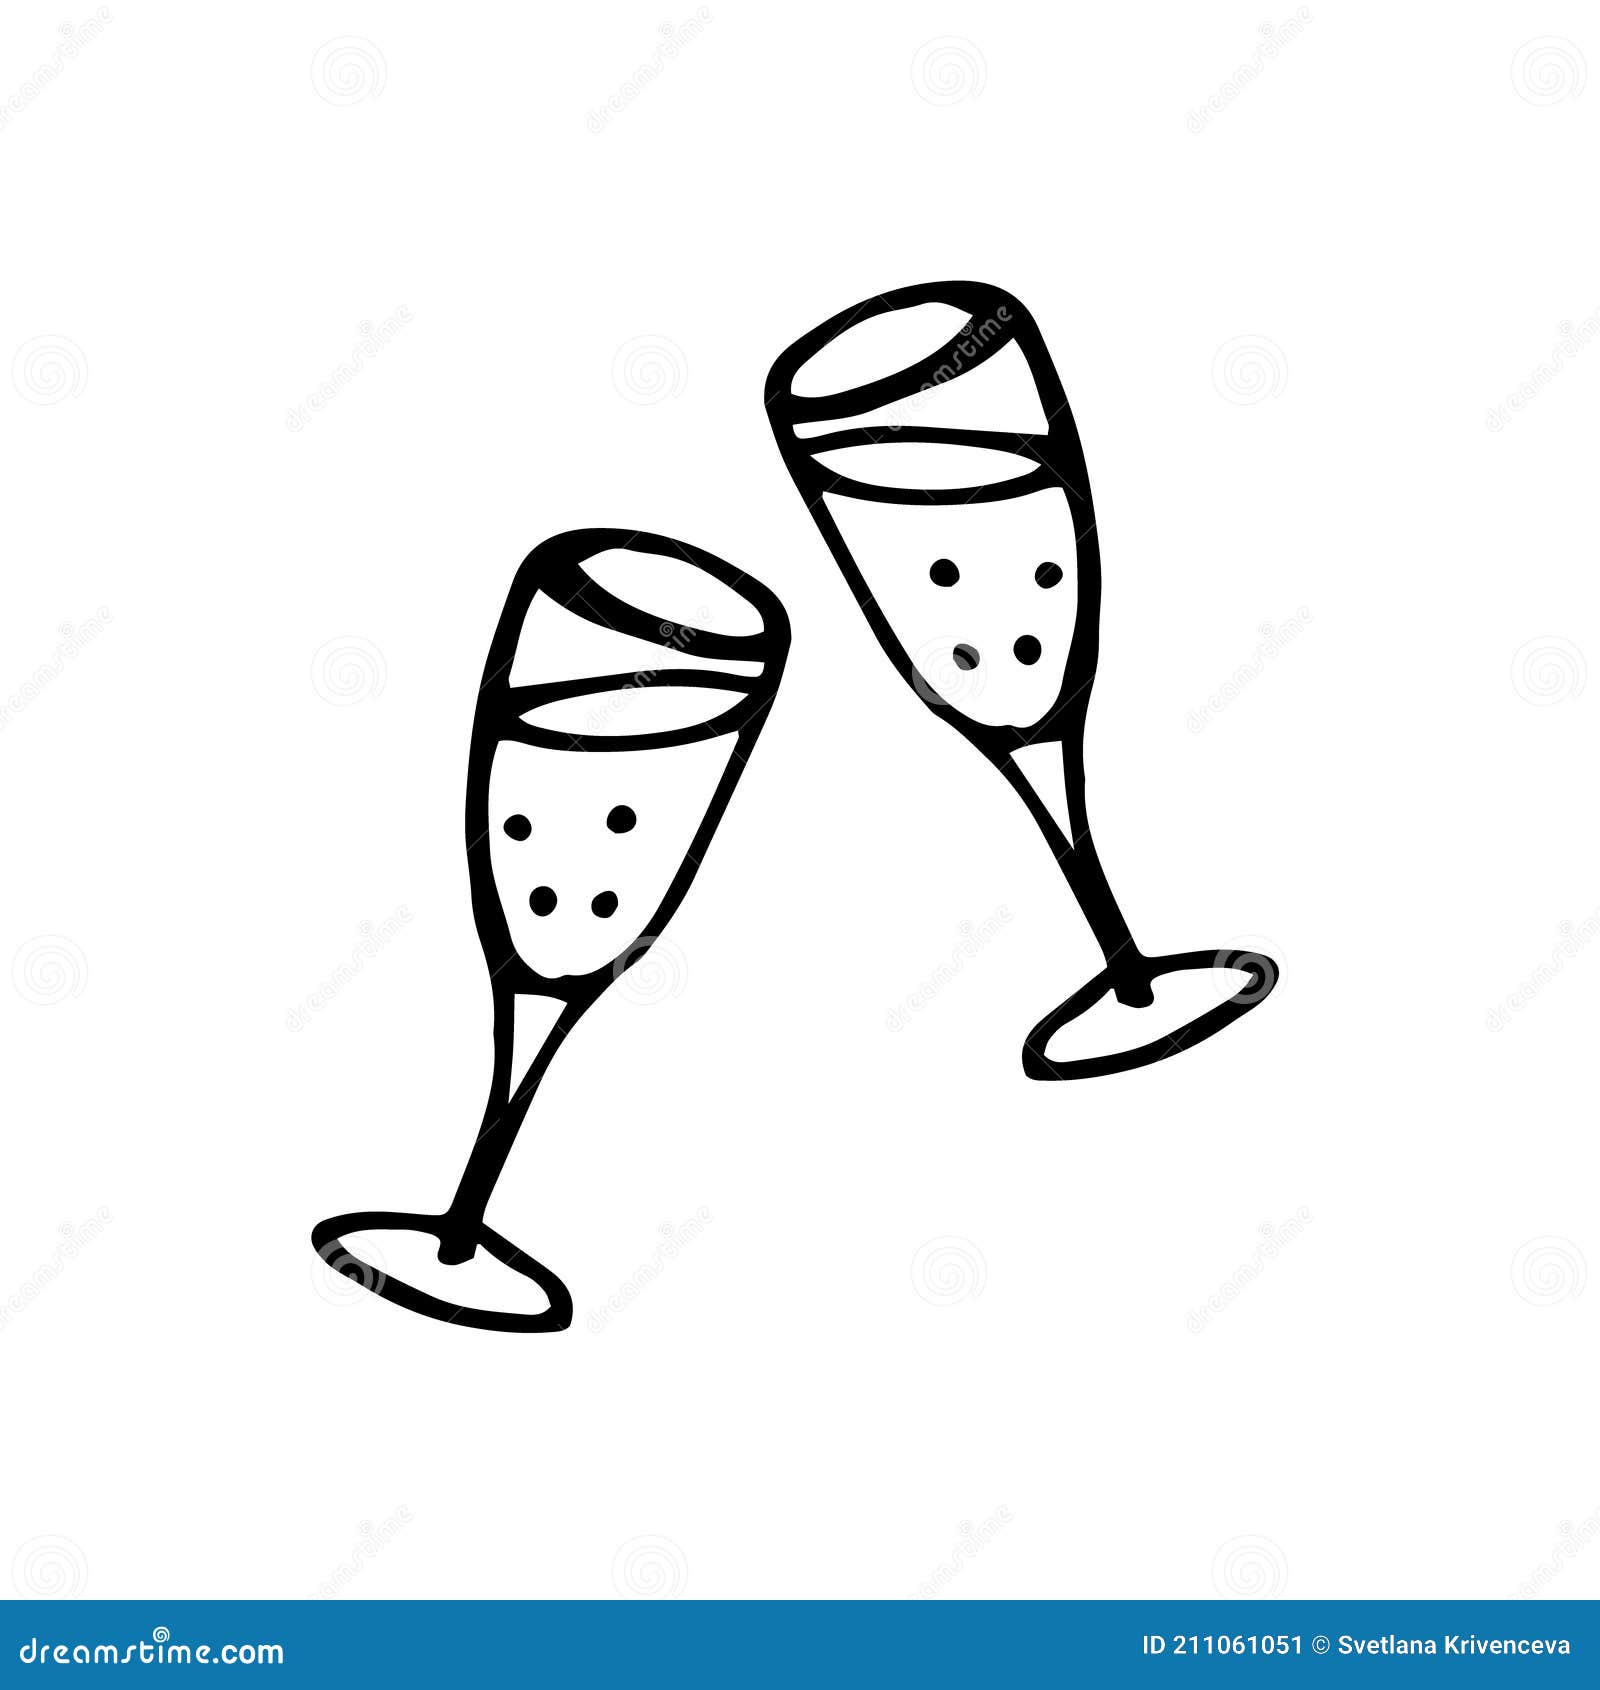 How to Draw a Wine Glass Easy - Easy Drawing Tutorial For Kids